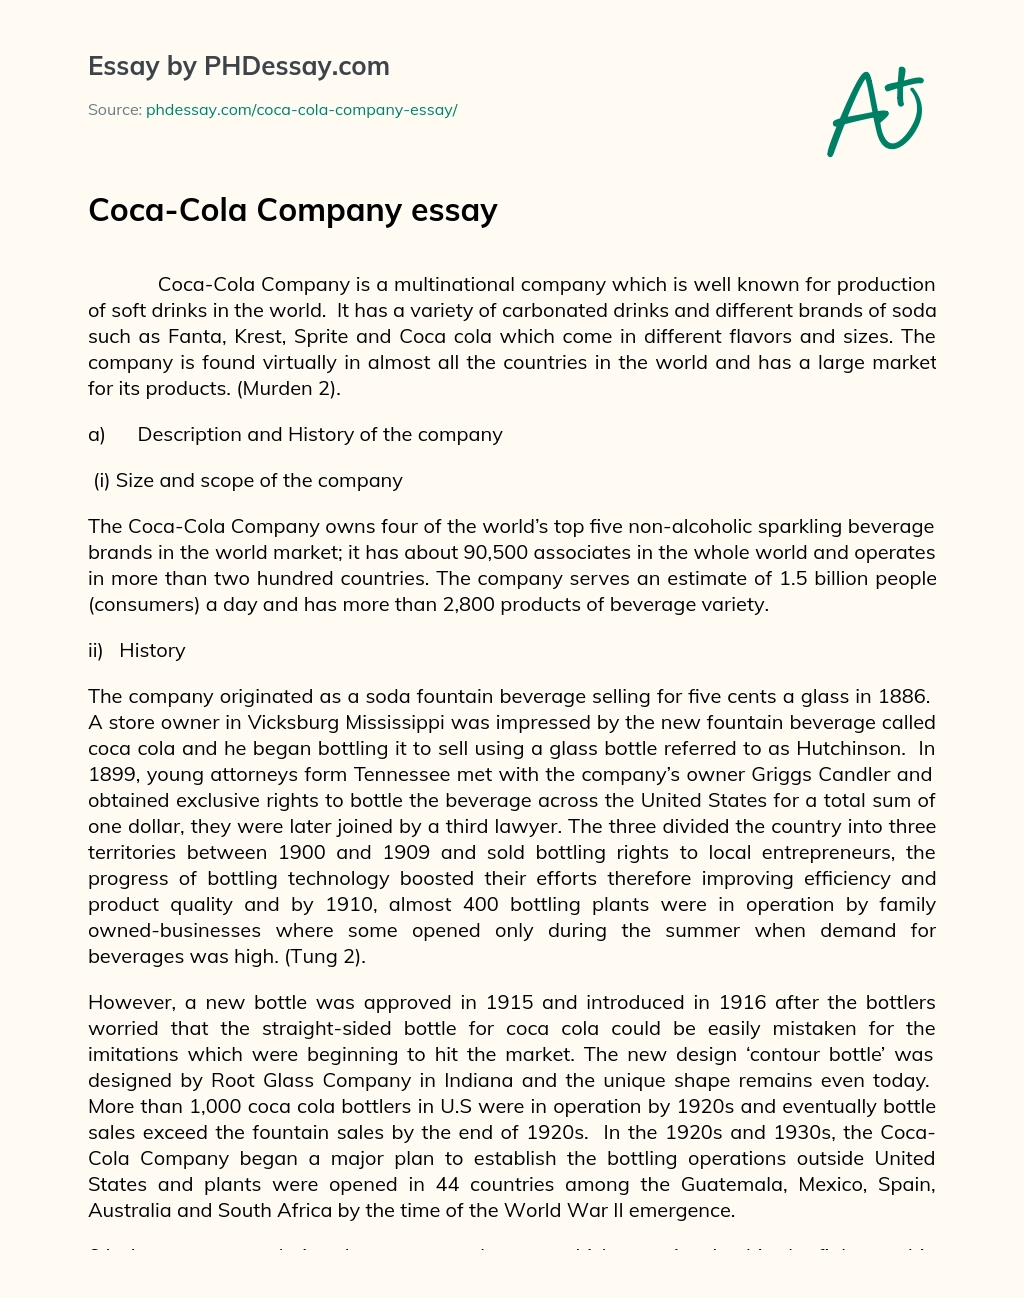 Реферат: Coca Cola Essay Research Paper AbstractThe CocaCola